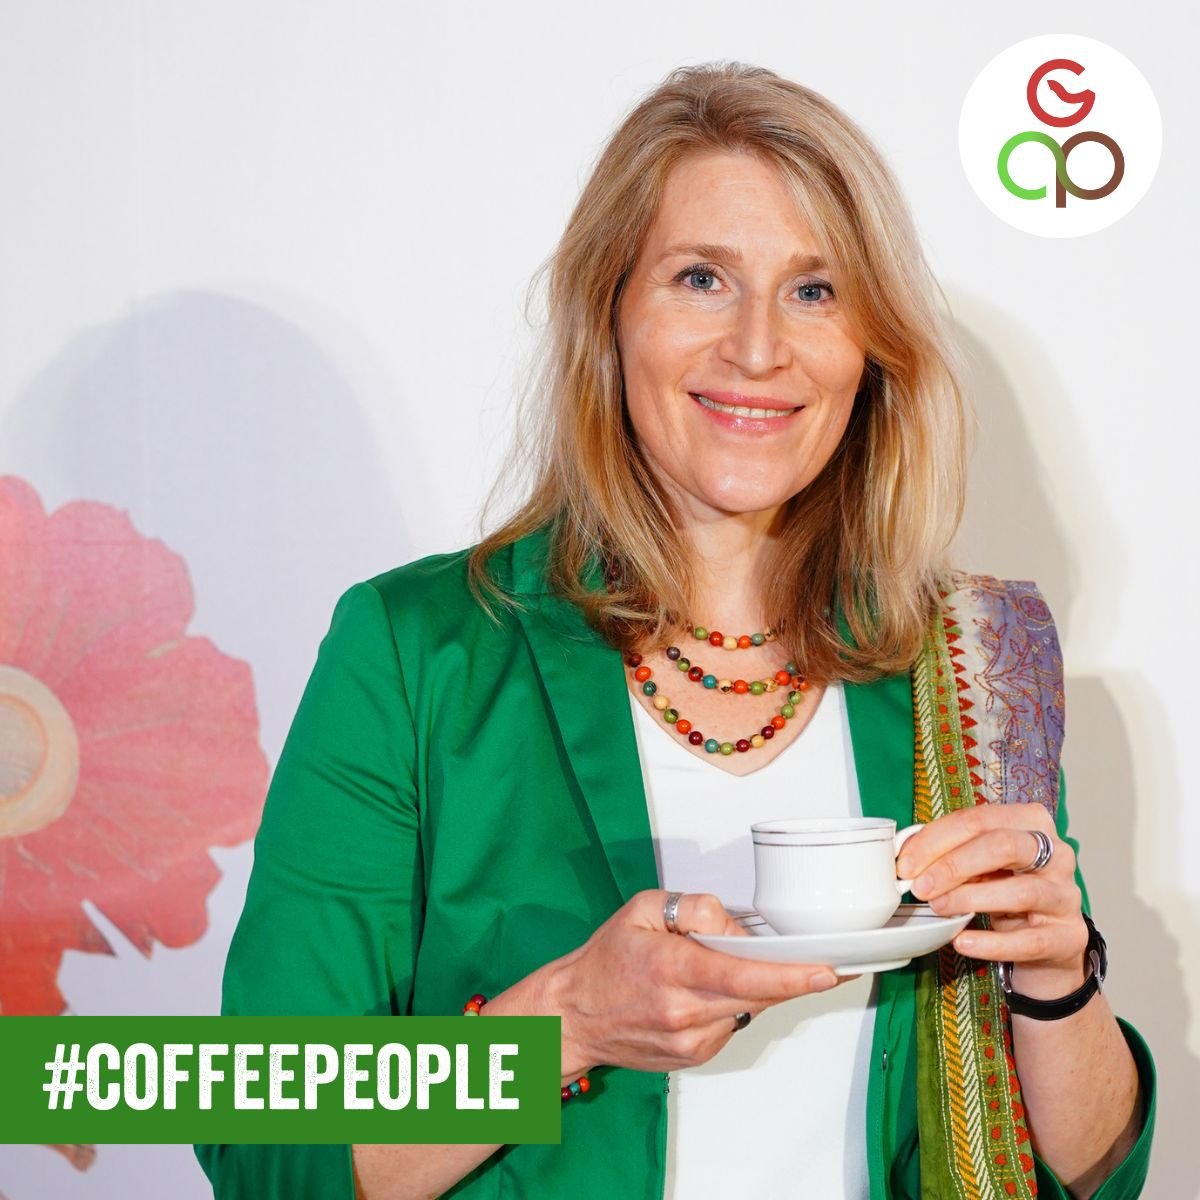 Annette Pensel, CEO of the Global Coffee Platform joining the #CoffeePeople campaign.